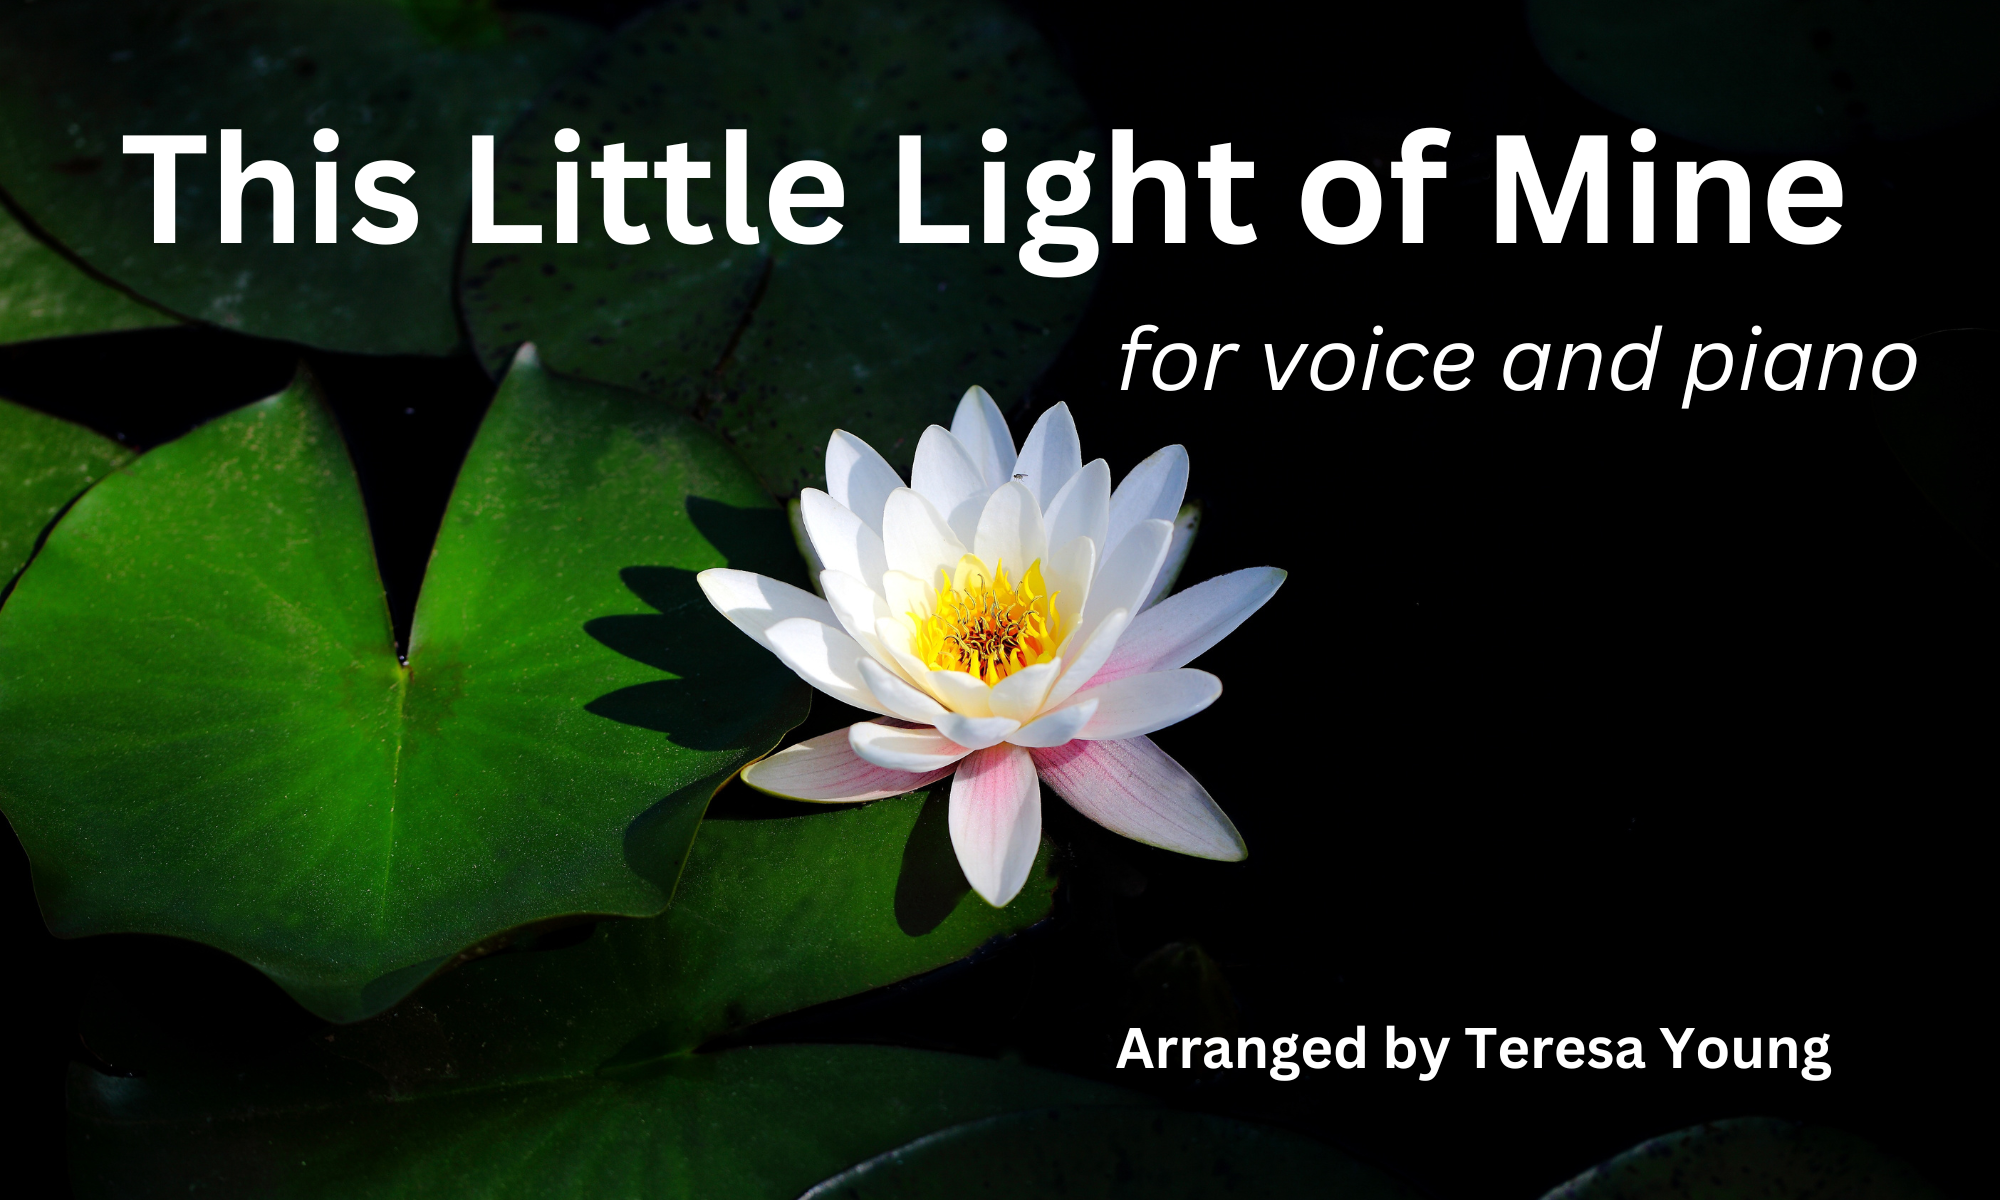 This Little Light of Mine, piano vocal, arranged by Teresa Young